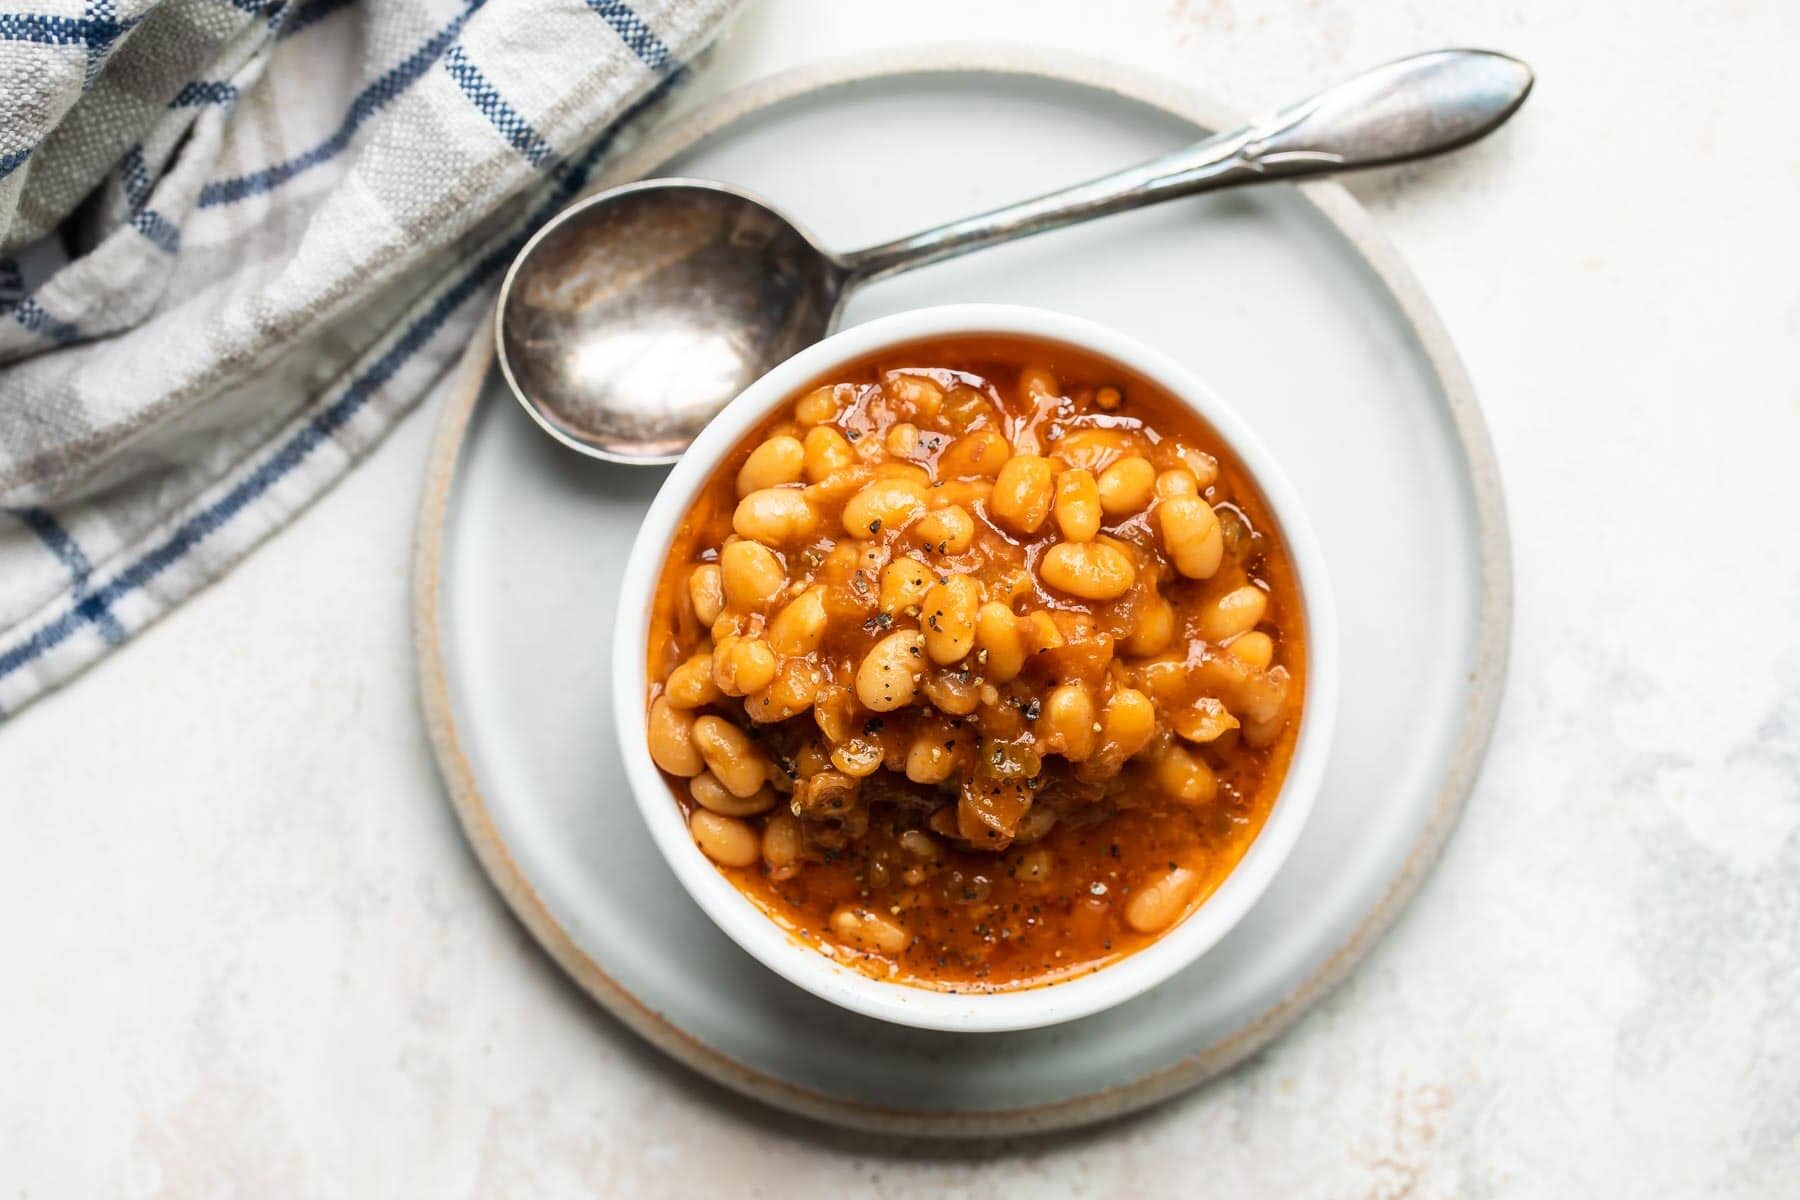 Slow cooker baked beans in a small white bowl.